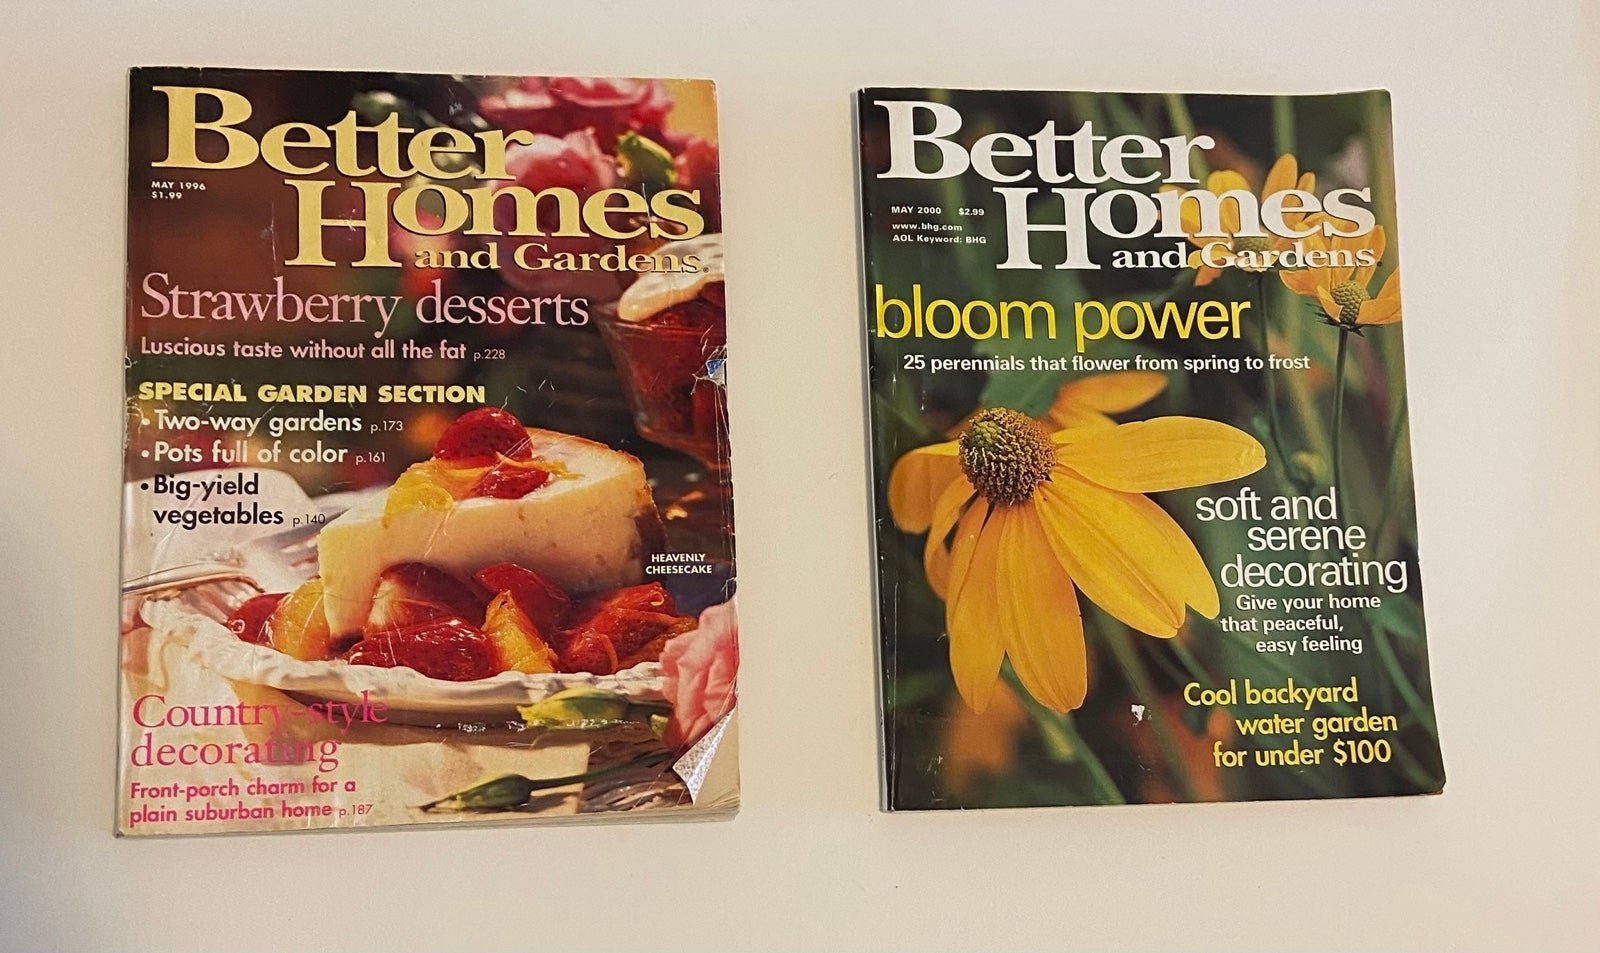 Better Homes and Gardens Magazines,1996 and 2000 0qe40V